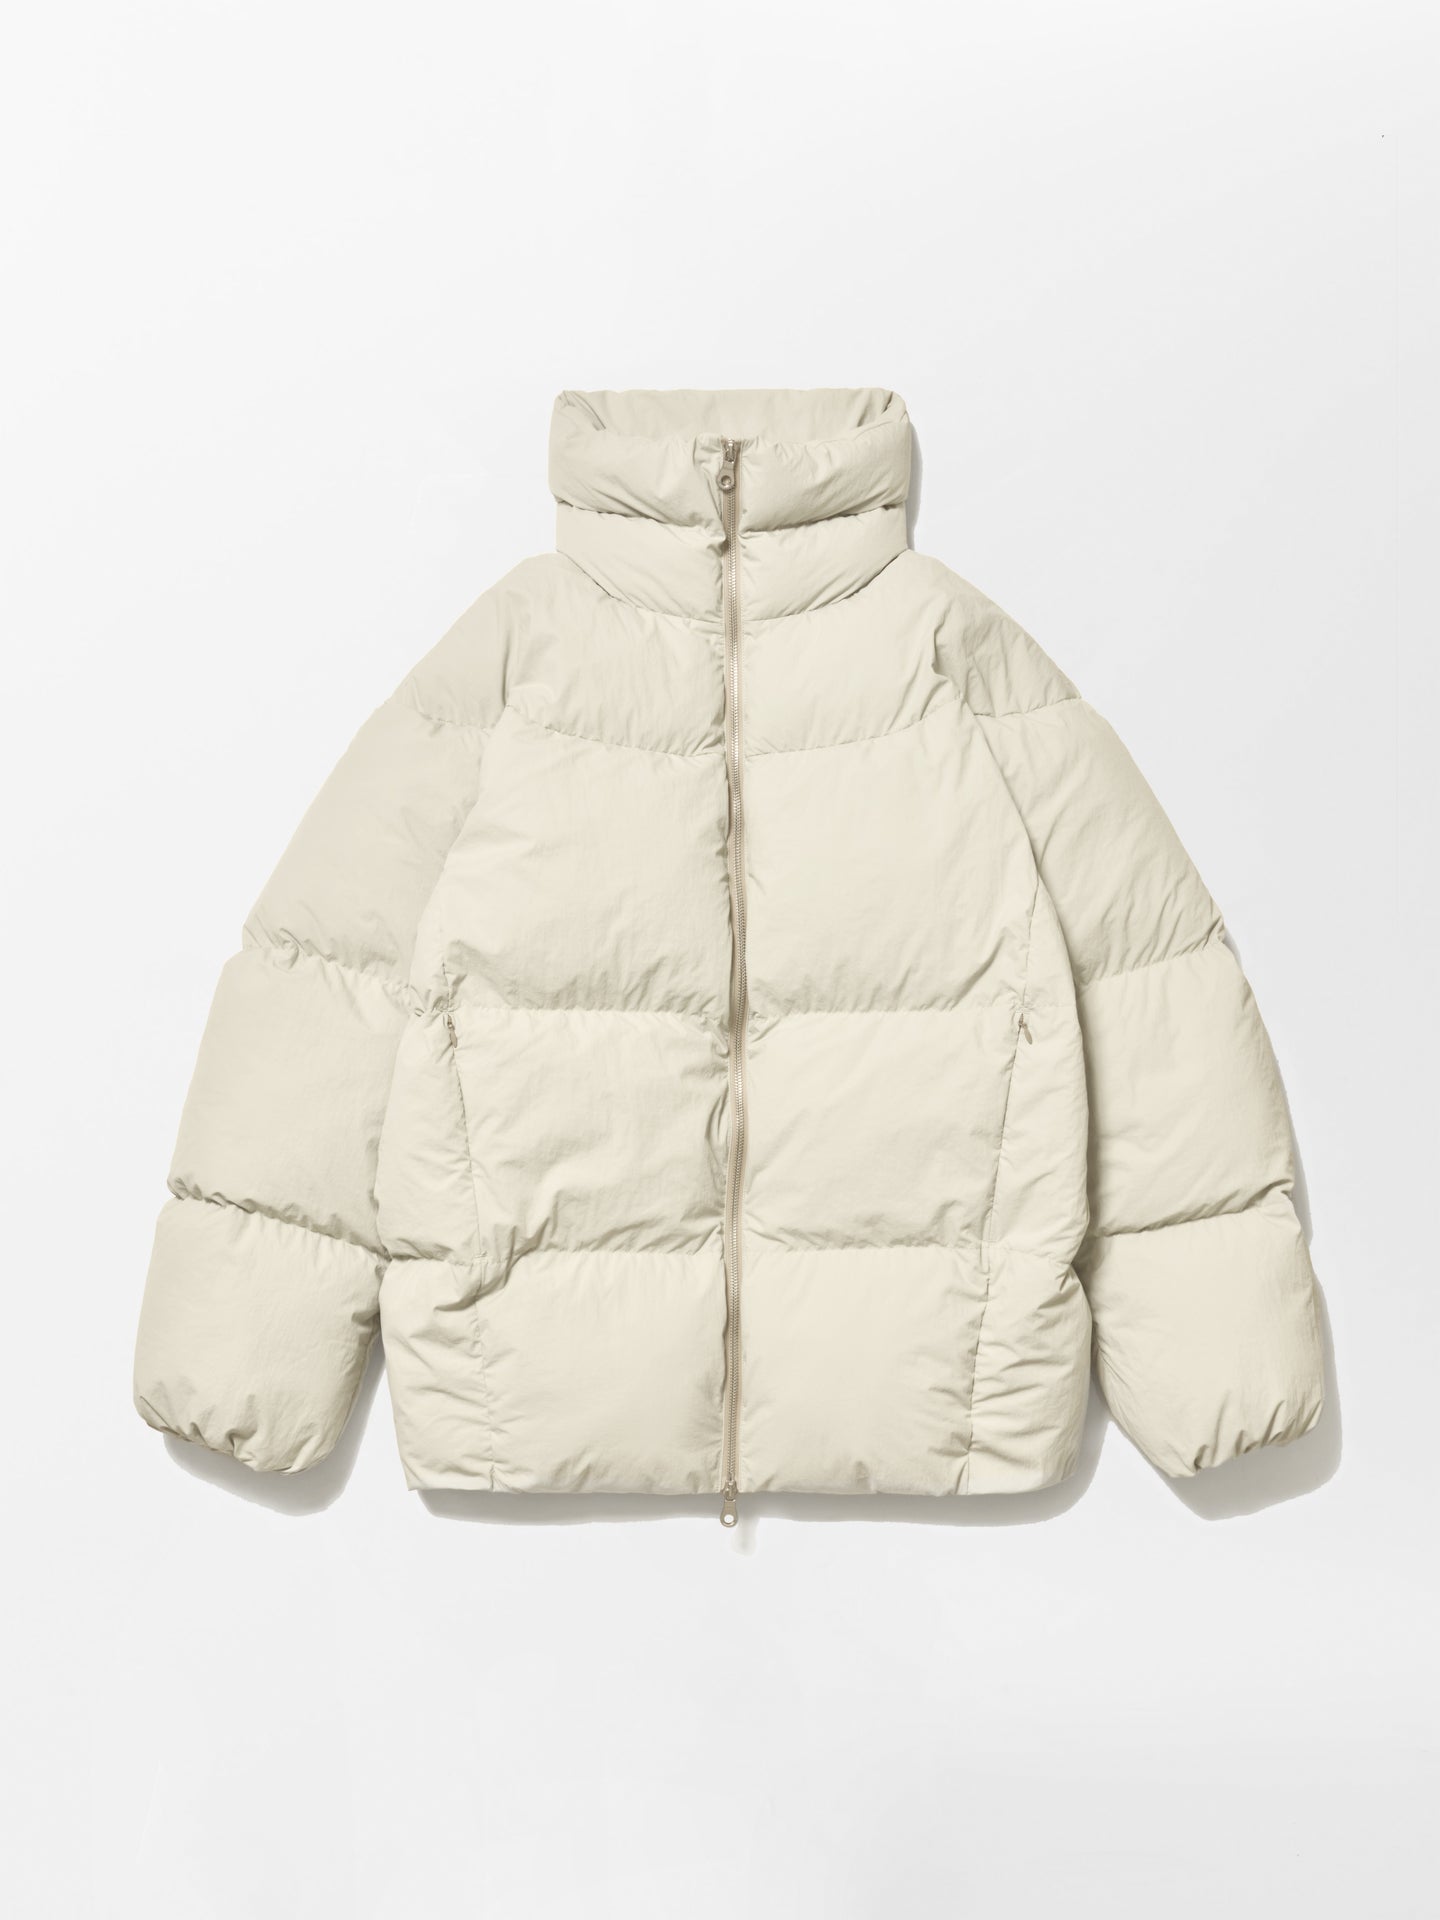 OJECT JACKET IN DOVE